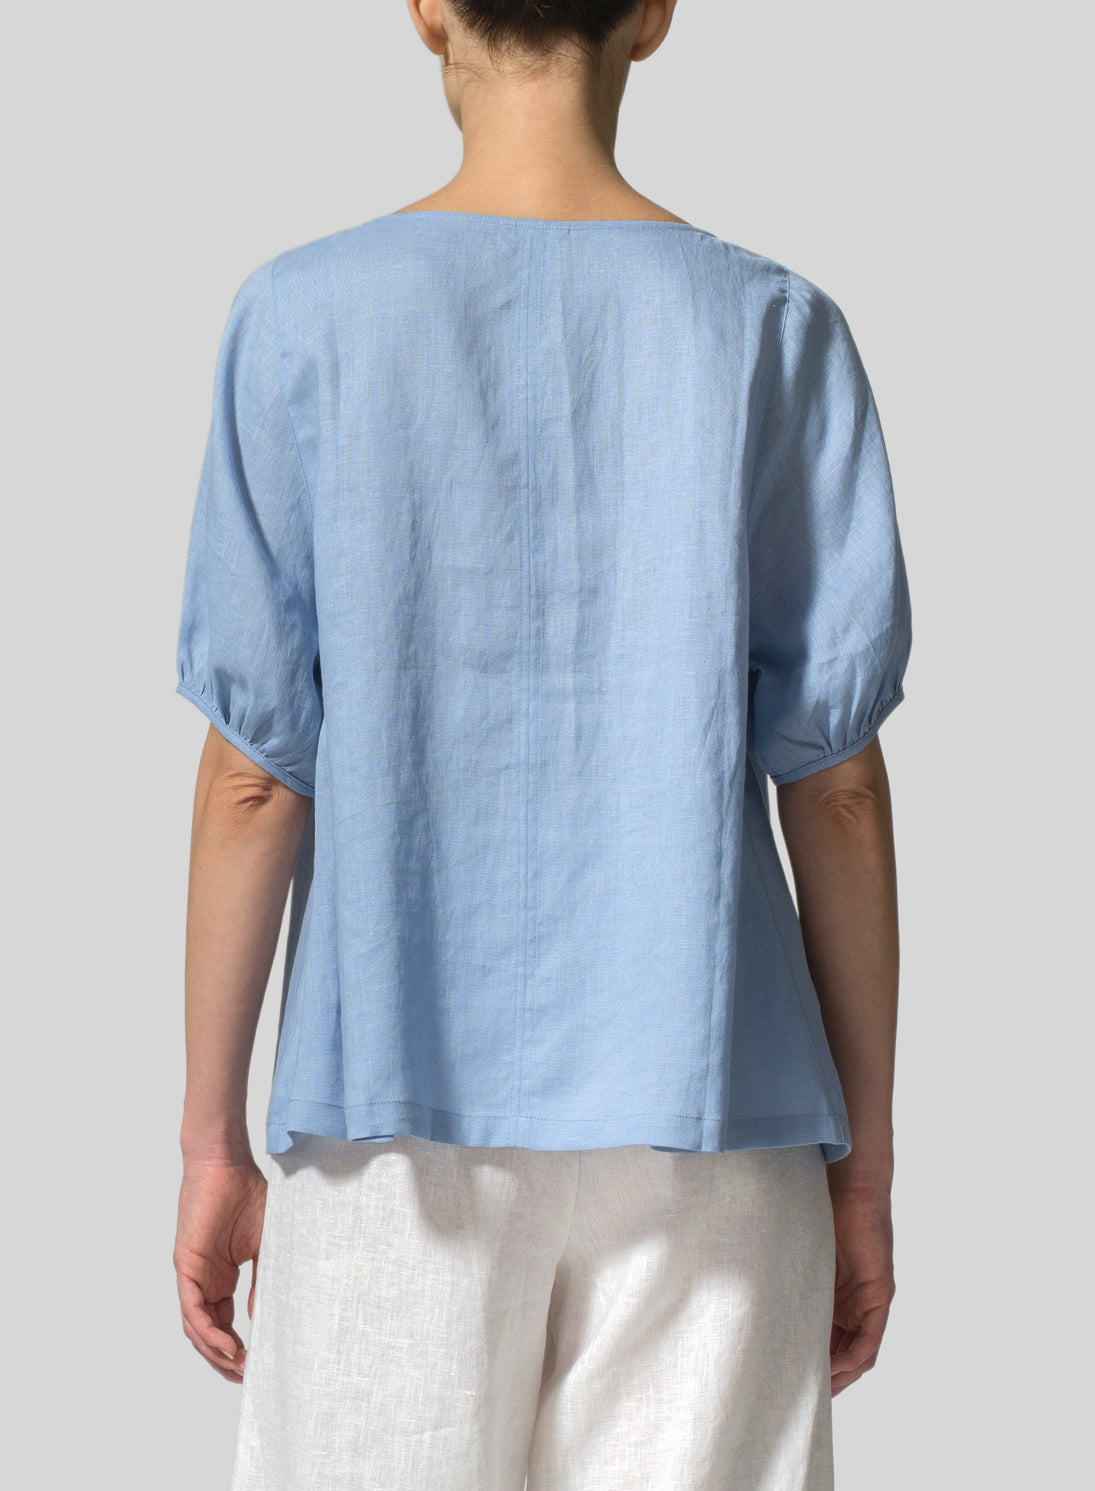 Cotton And Linen Drawstring Cuff Short Sleeve Top